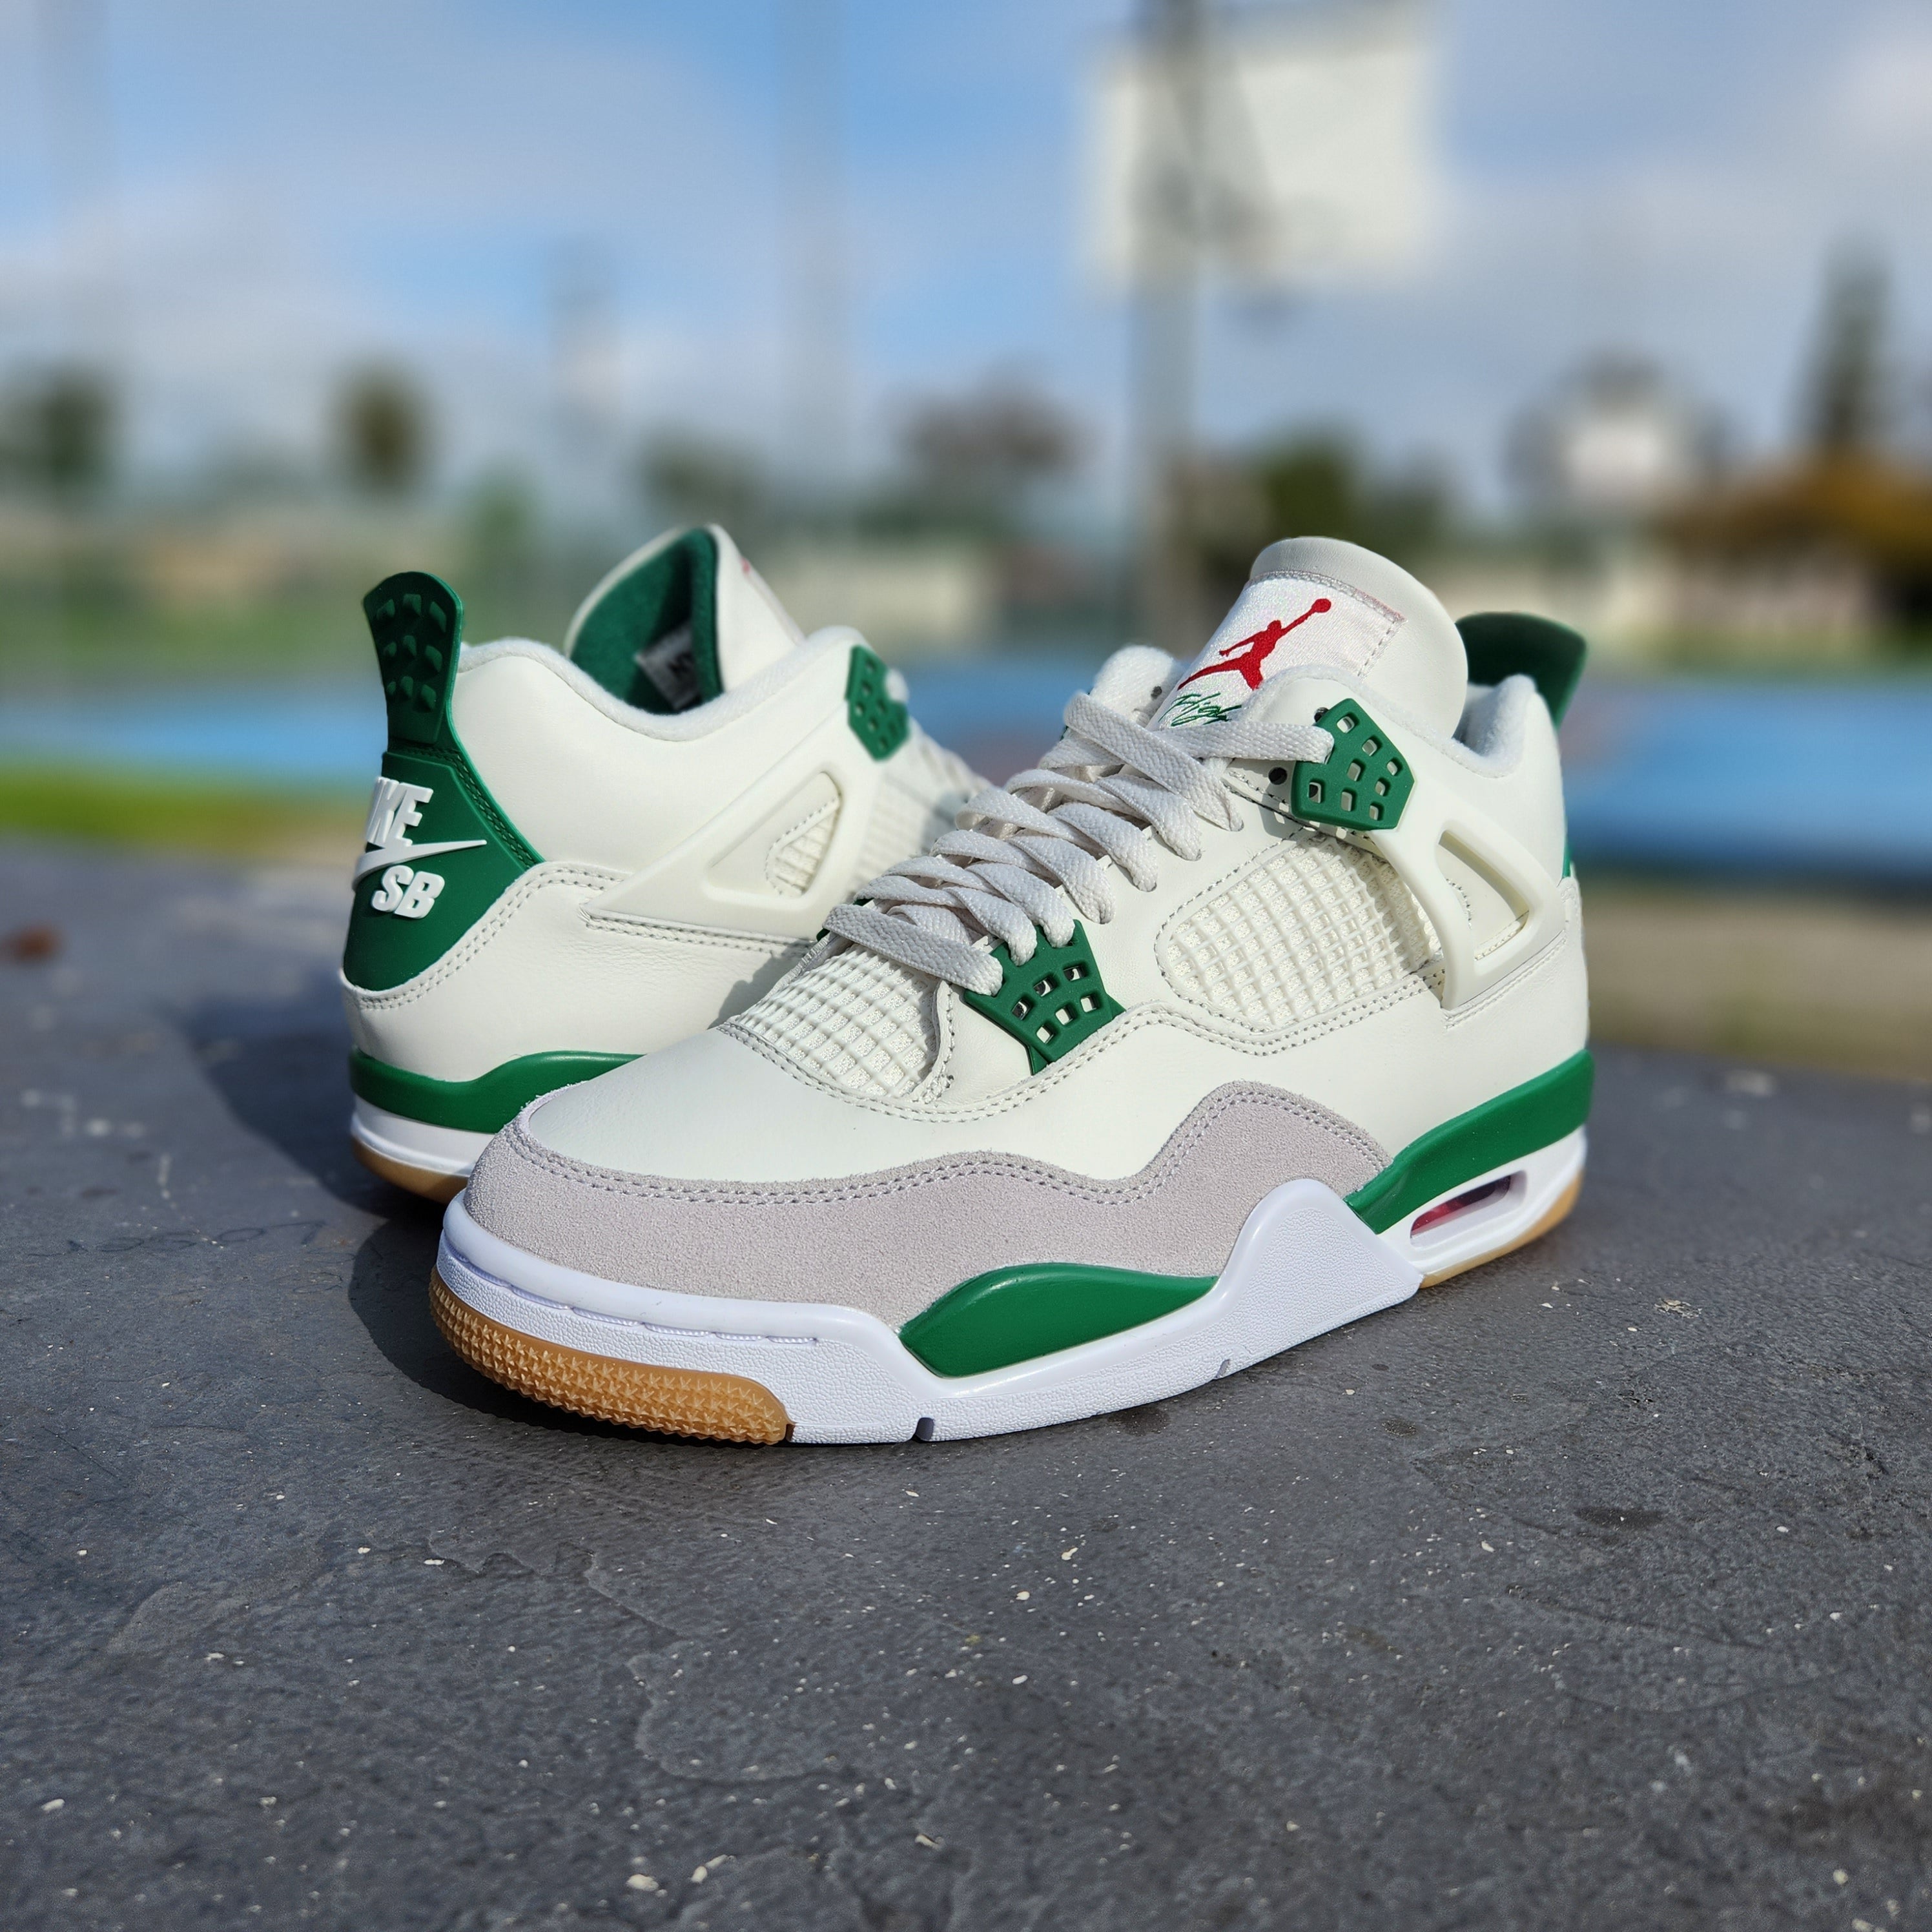 Nike SB x Air Jordan 4 Pine Green Release Date, Design Features, and PRIVATE SNEAKERS